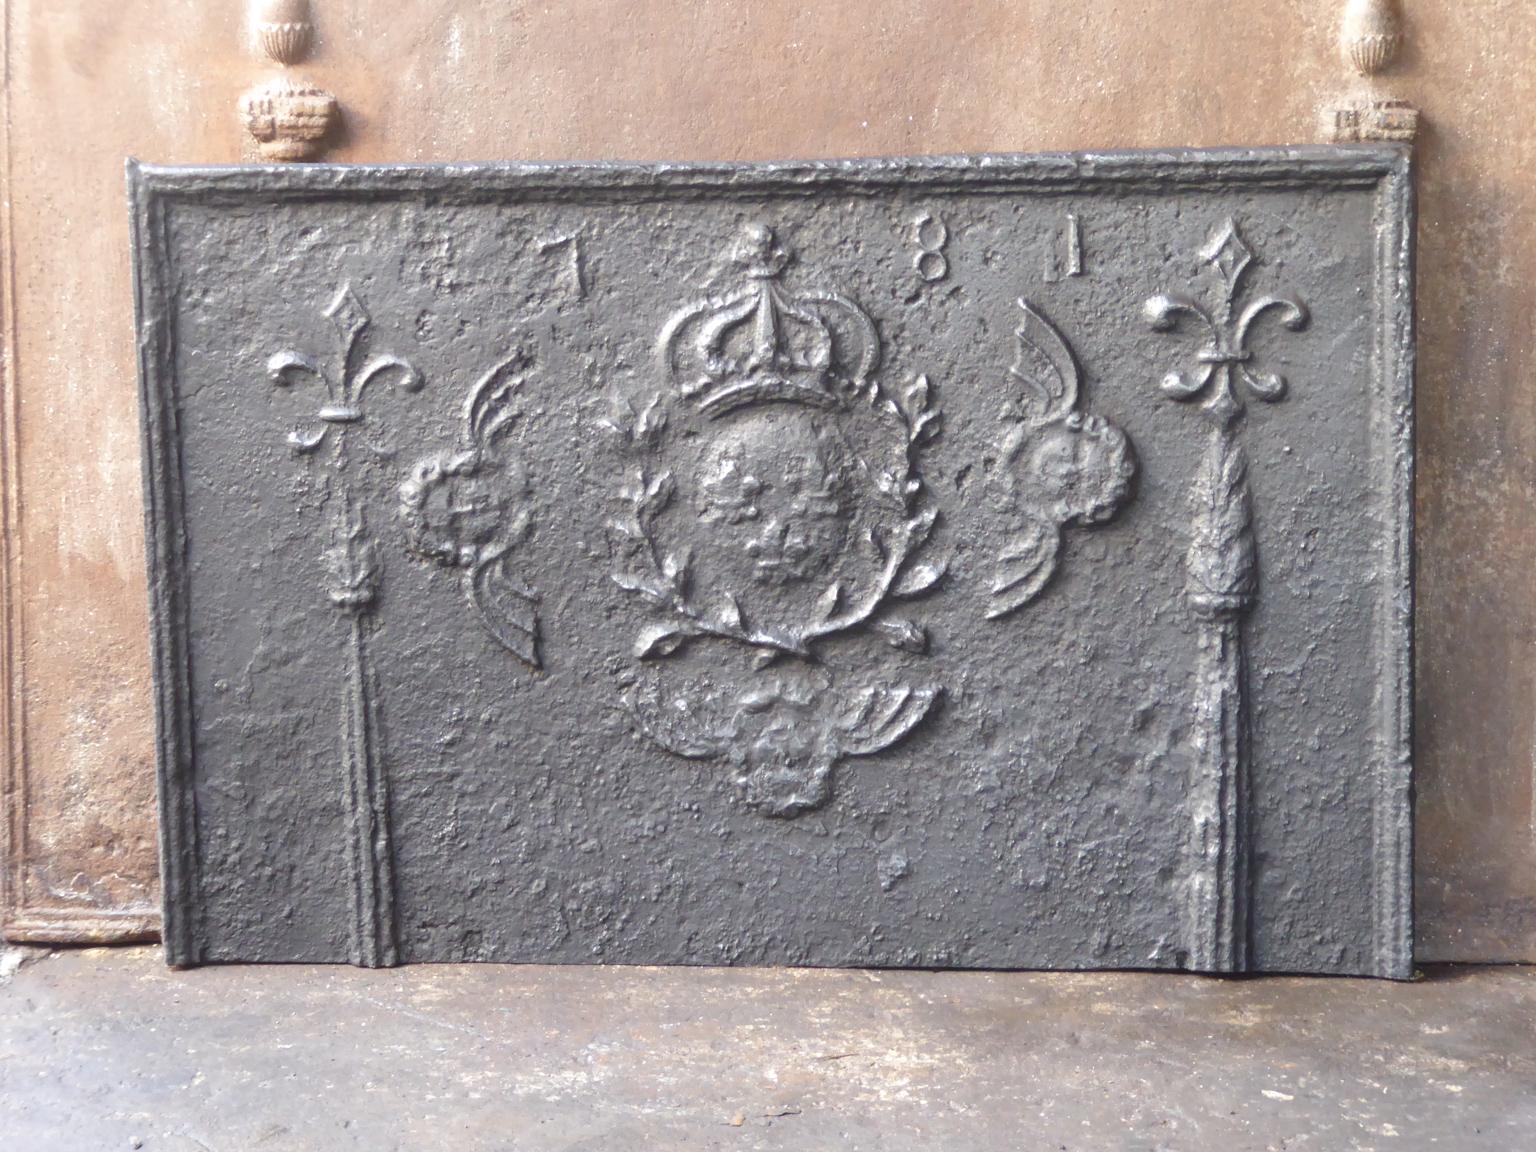 18th century French Louis XV fireback with the arms of France. The arms of France are flanked by two Pillars of Hercules, which symbolize strength and the unknown. The pillars are topped by fleurs-de-lis (French Lillies) which stand for purity and